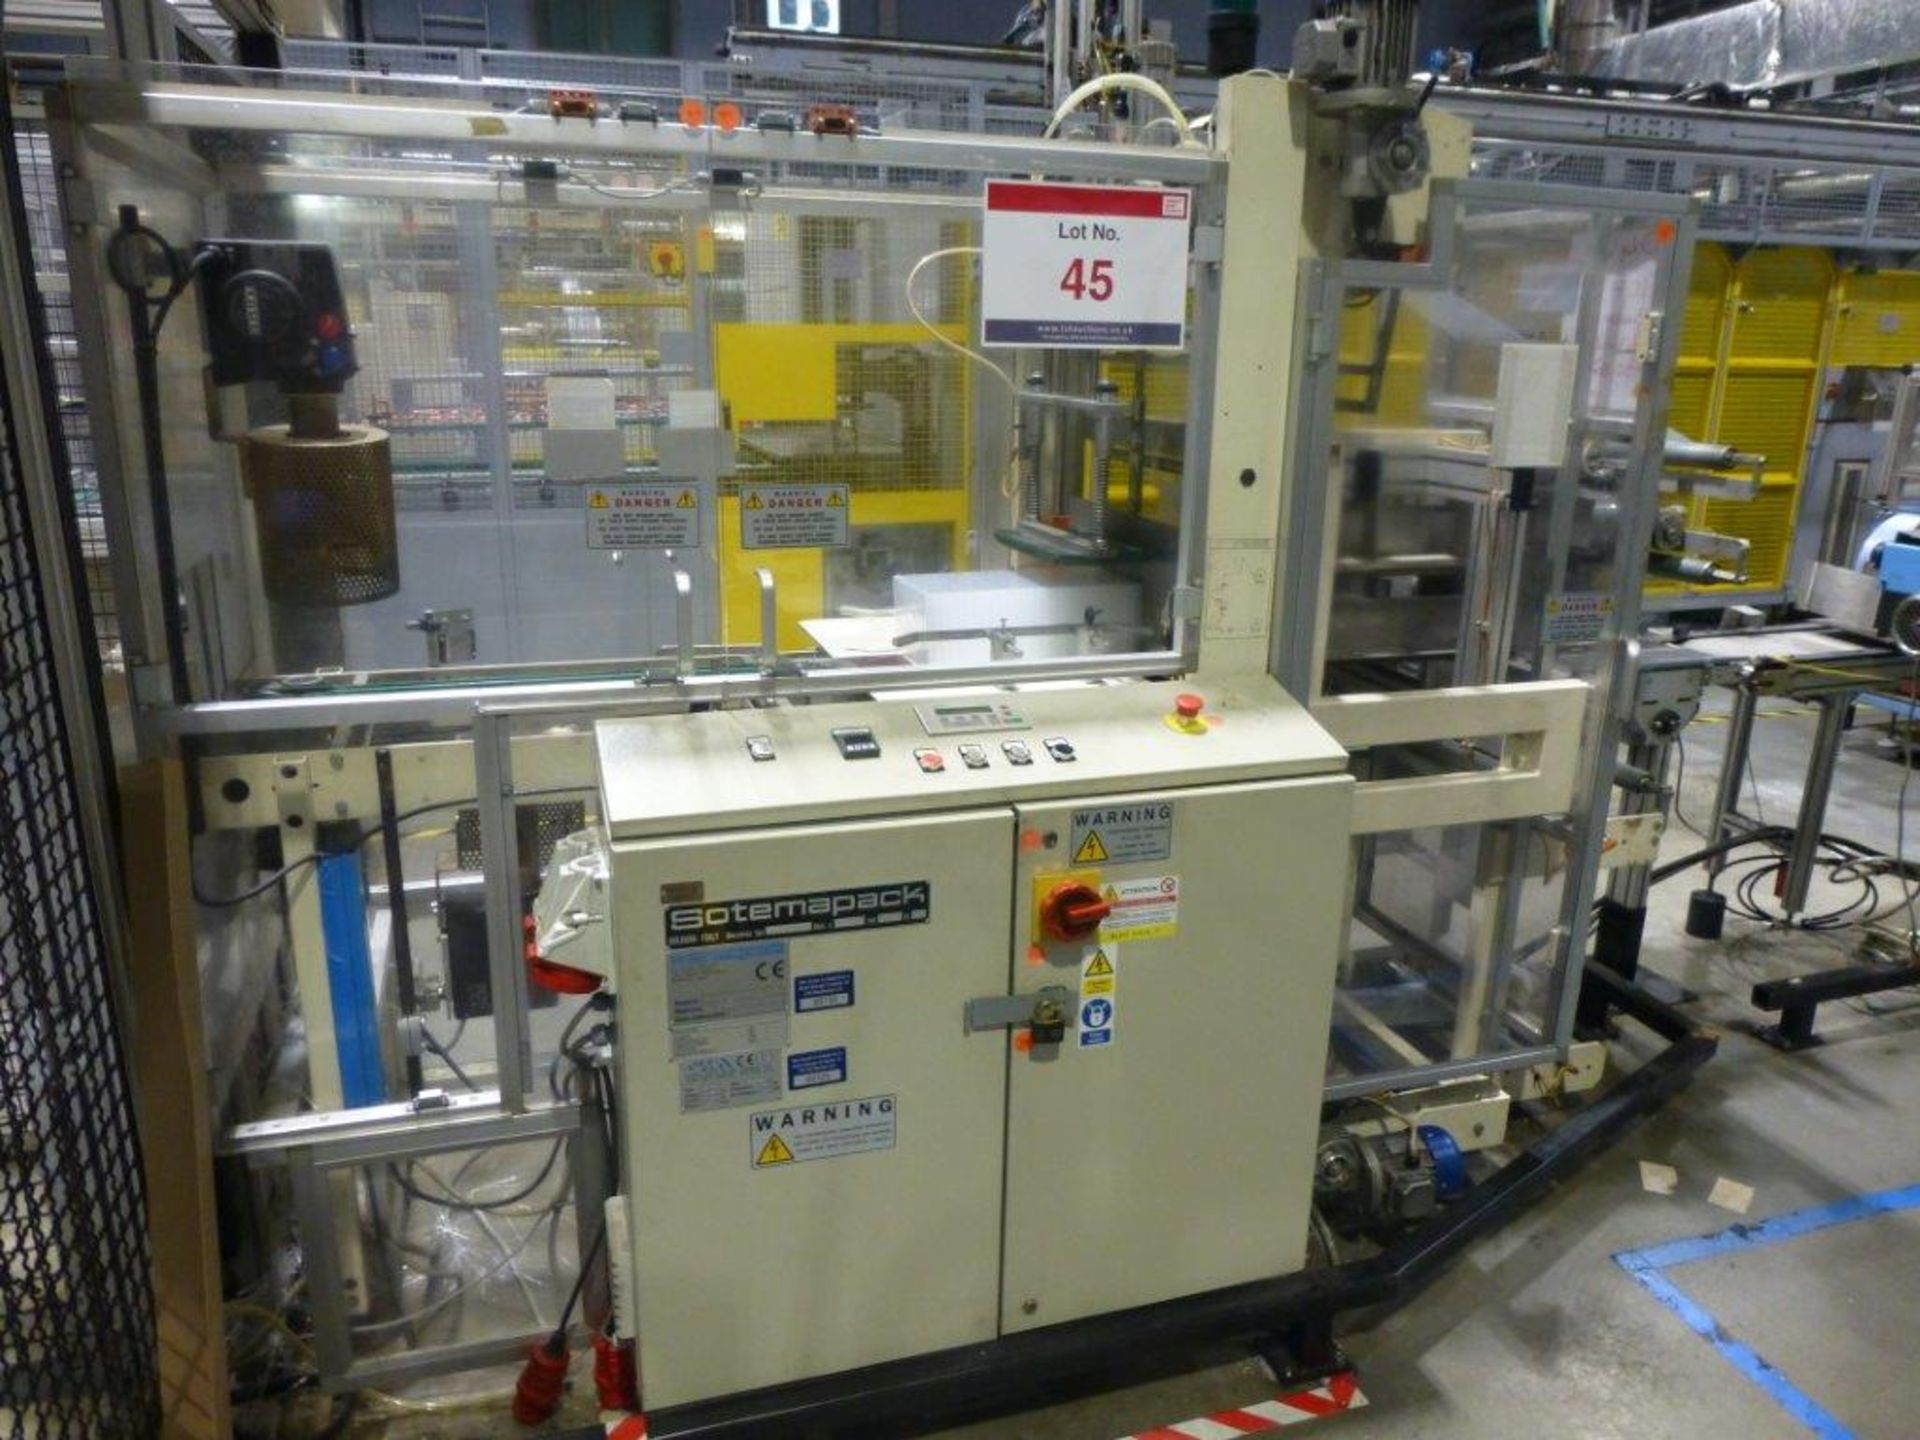 Gima 888 DVD multi case wrapper, serial No 88852F0 (2002) with film unwind unit, 2 Leister hot air